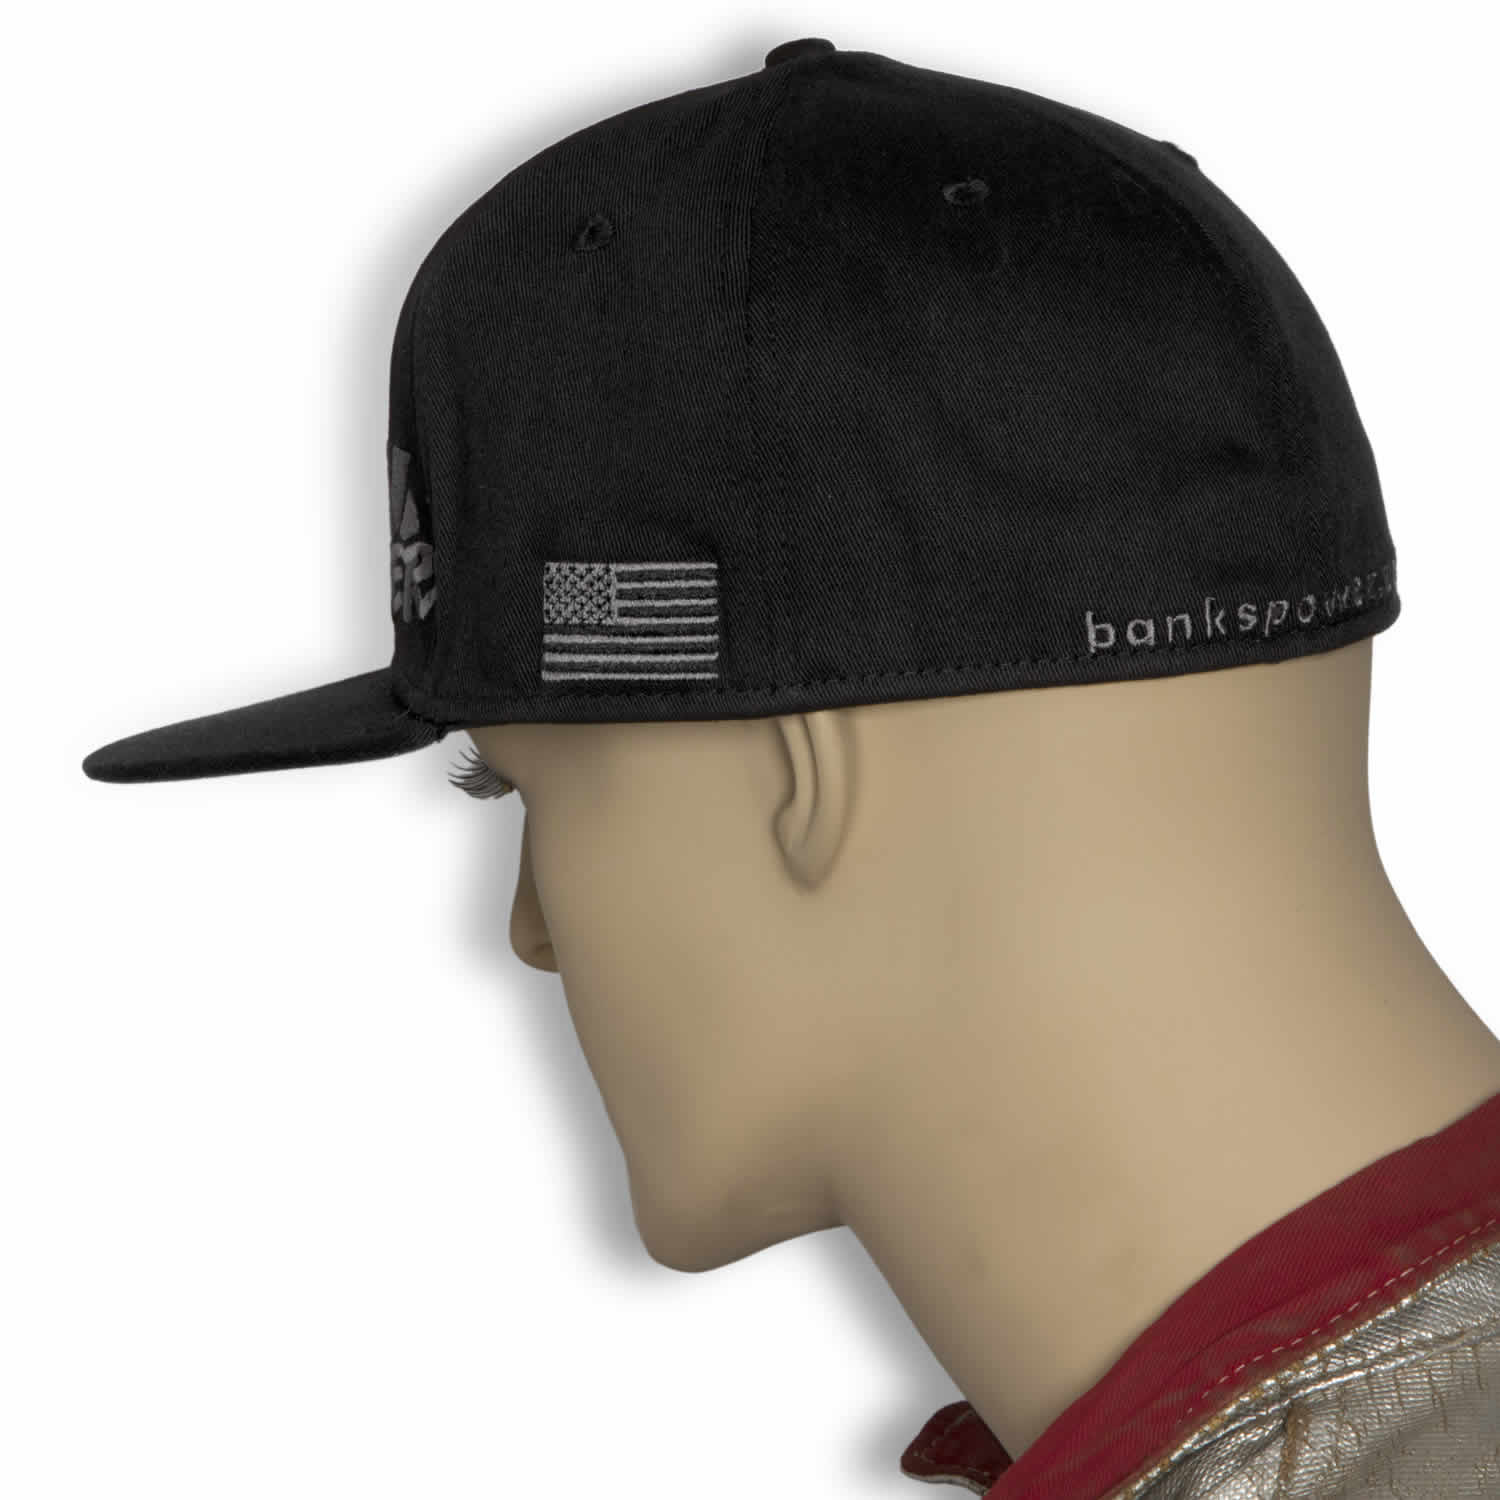 Power Hat Premium Fitted Black/Gray Flat Bill Flexible Fit Banks Power